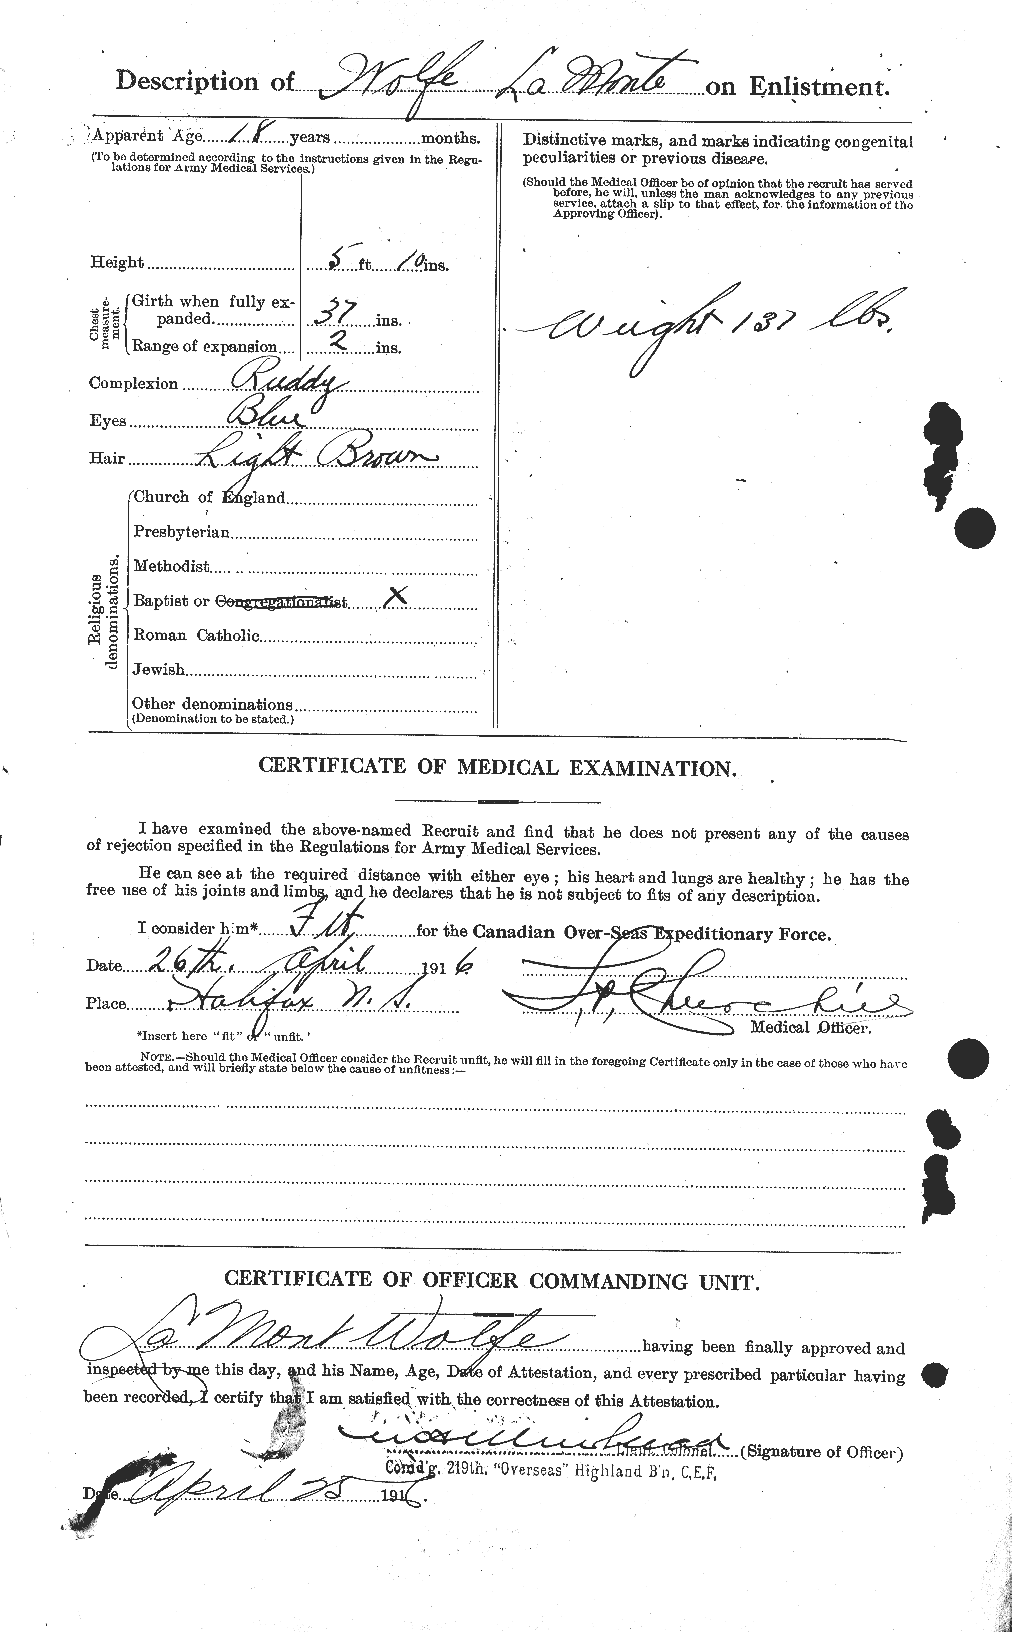 Personnel Records of the First World War - CEF 682380b